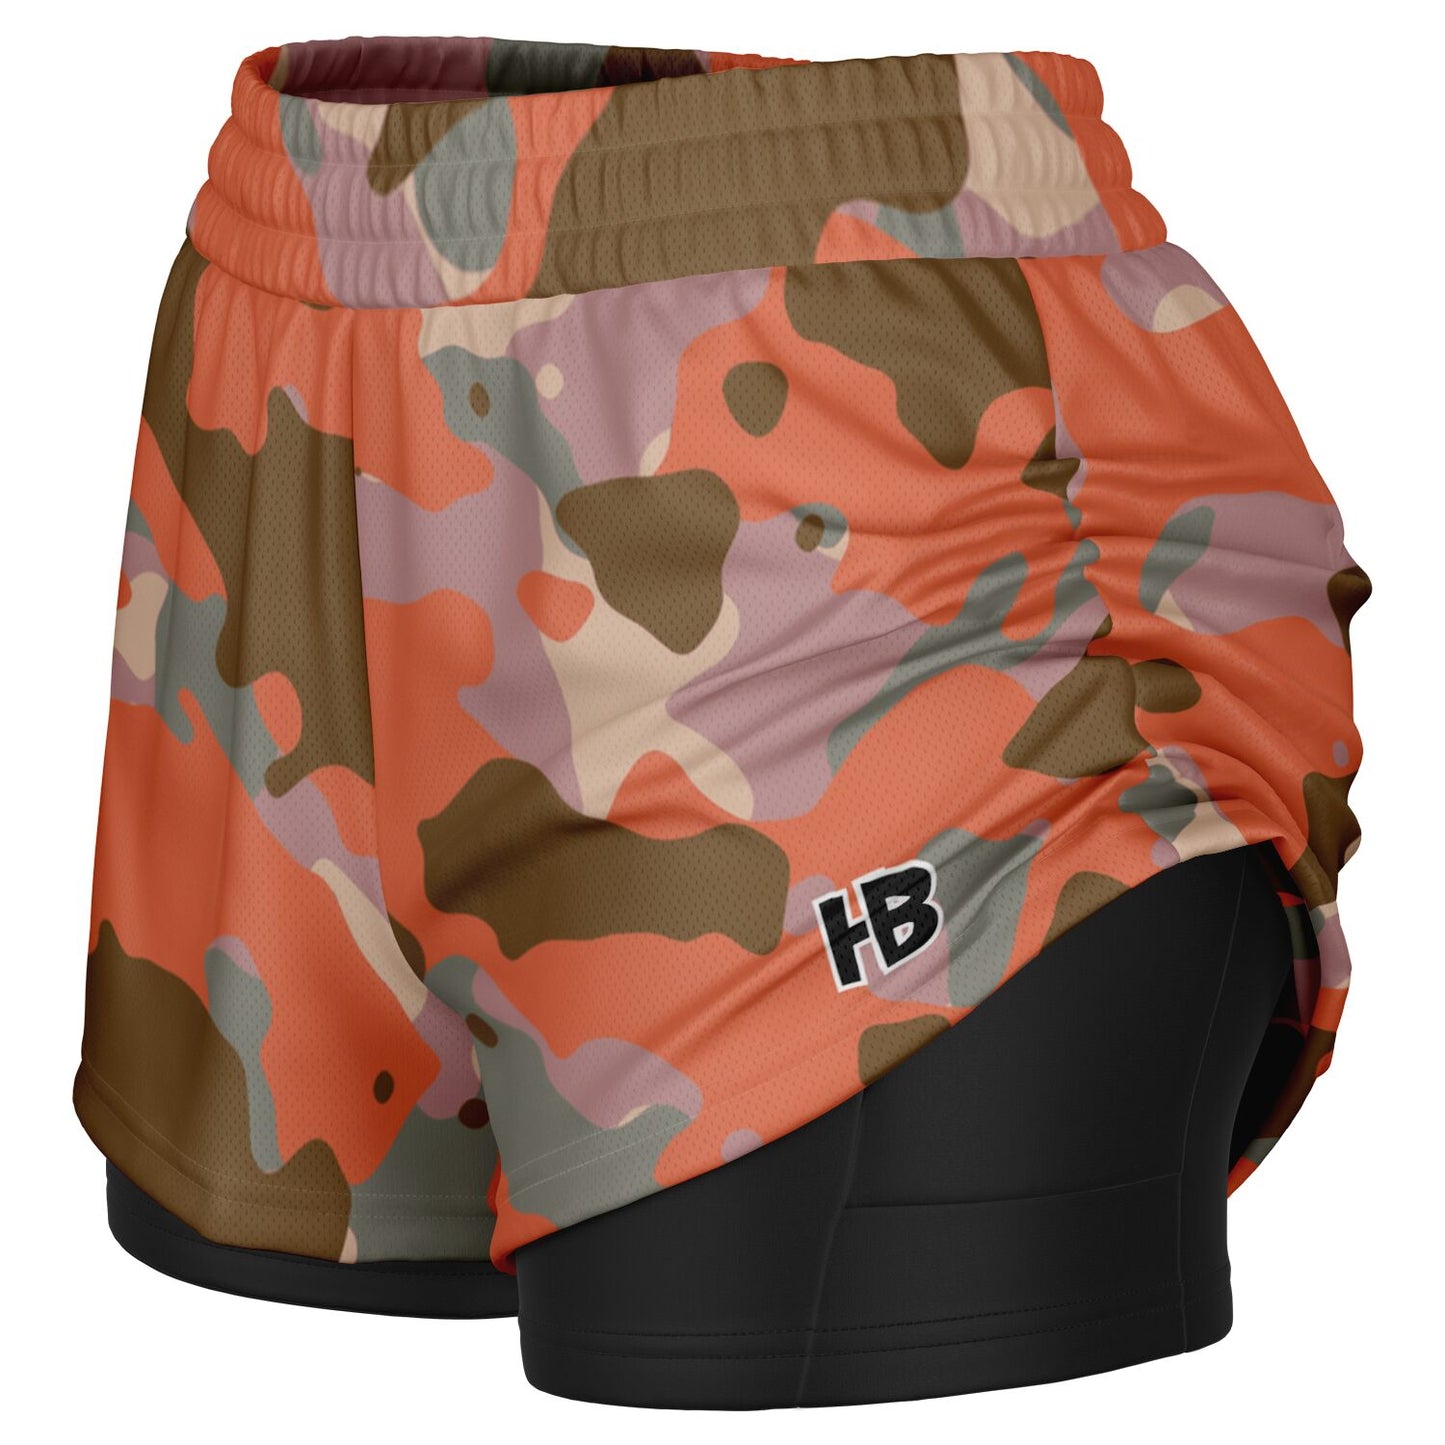 OrAnGe YoU cAnT cAmO mEn'S AnD wOmEN's 2 In 1 ShOrTs